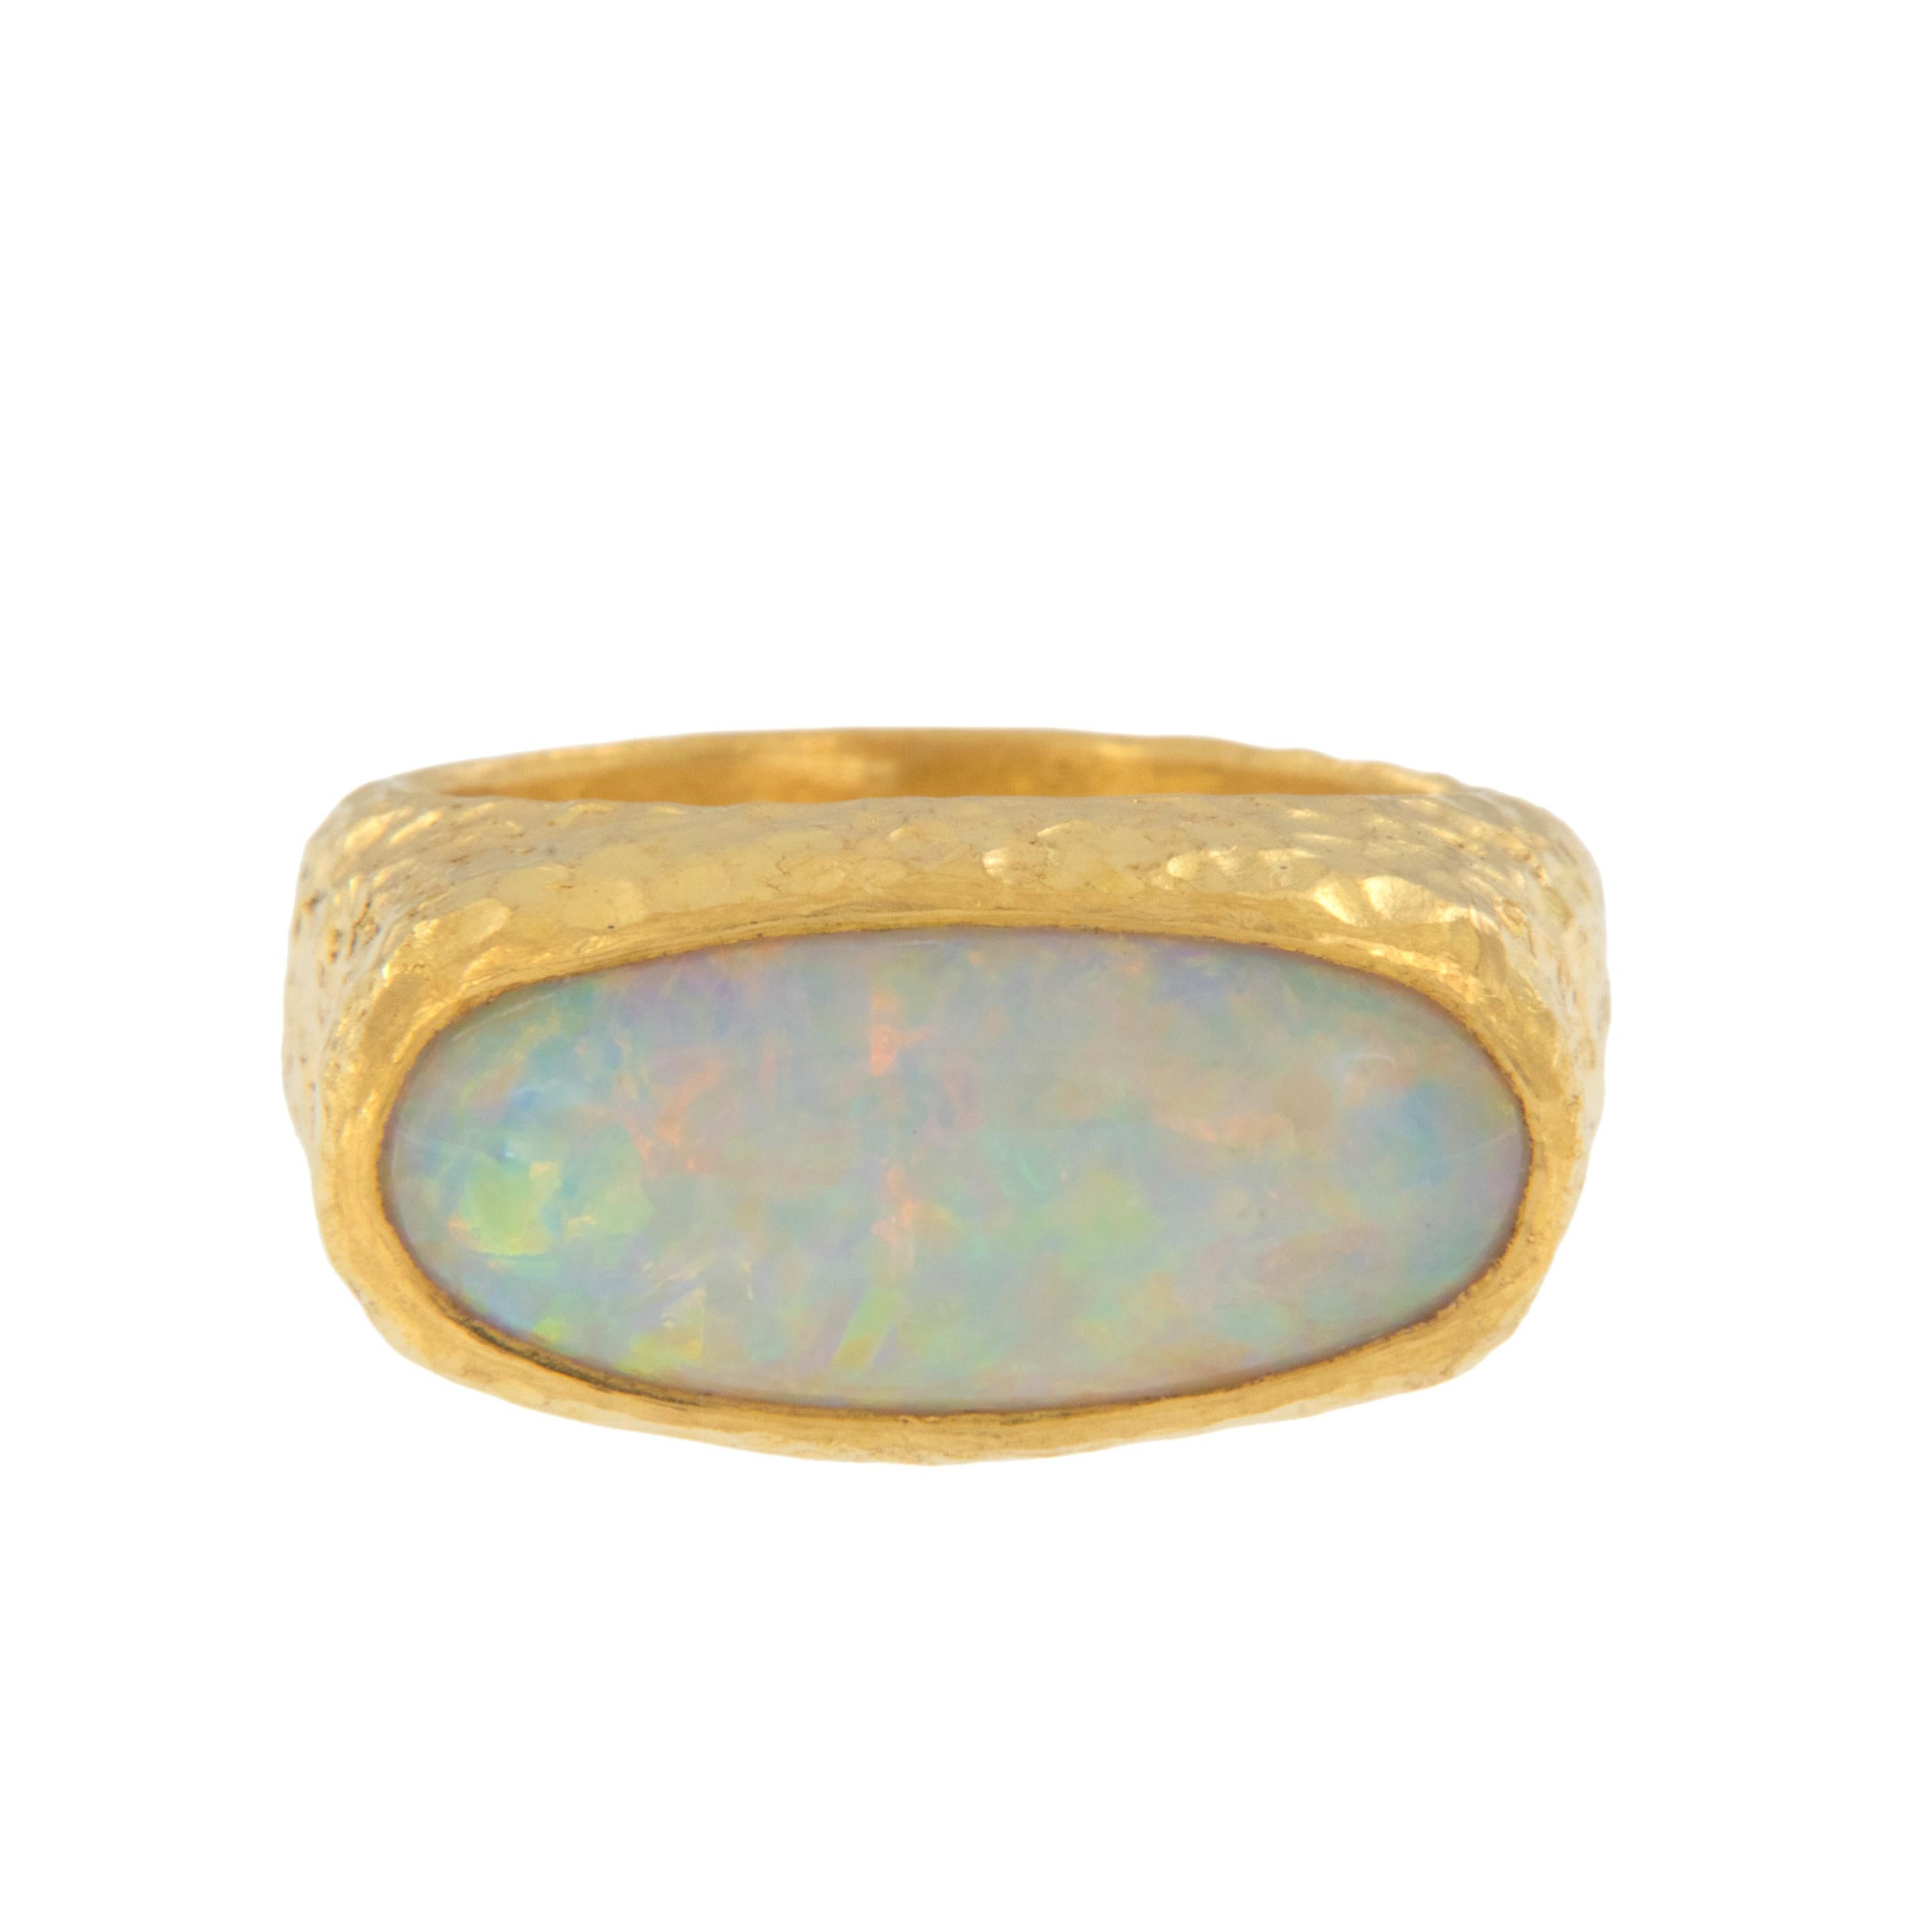 Rarest of all the golds, 24 karat gold is valued by all discerning investors. With it's unmistakable warm yellow color & hammered finish, this pure 24 karat yellow gold One of a Kind hand made ring with interesting hammered finish showcases a